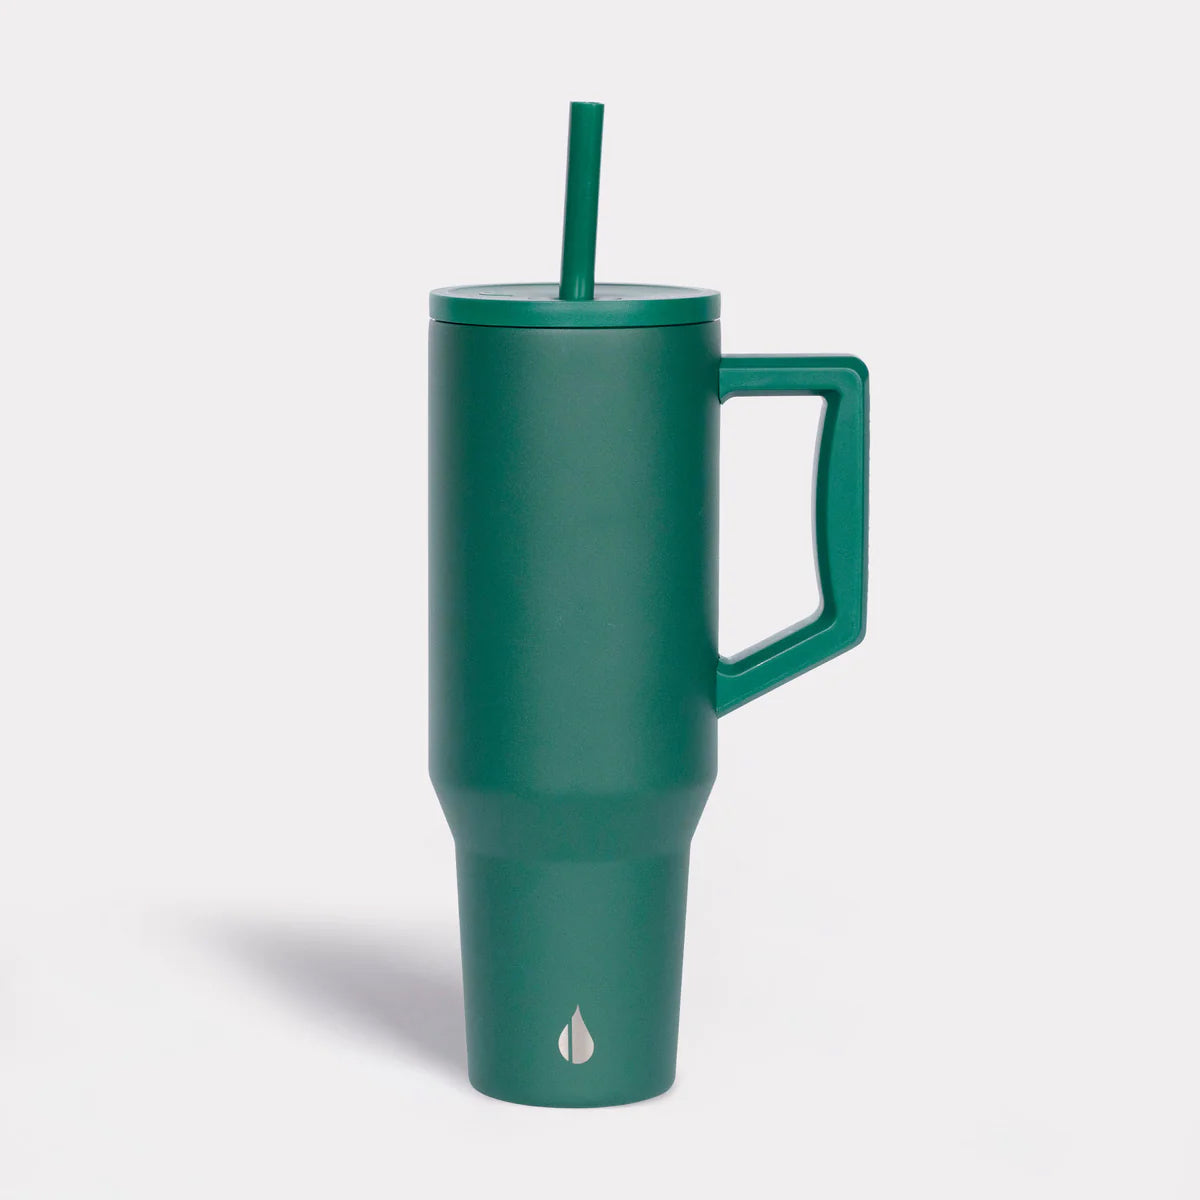 Customized Elemental 40 oz stainless steel tumbler with interchangeable straws in forest green.